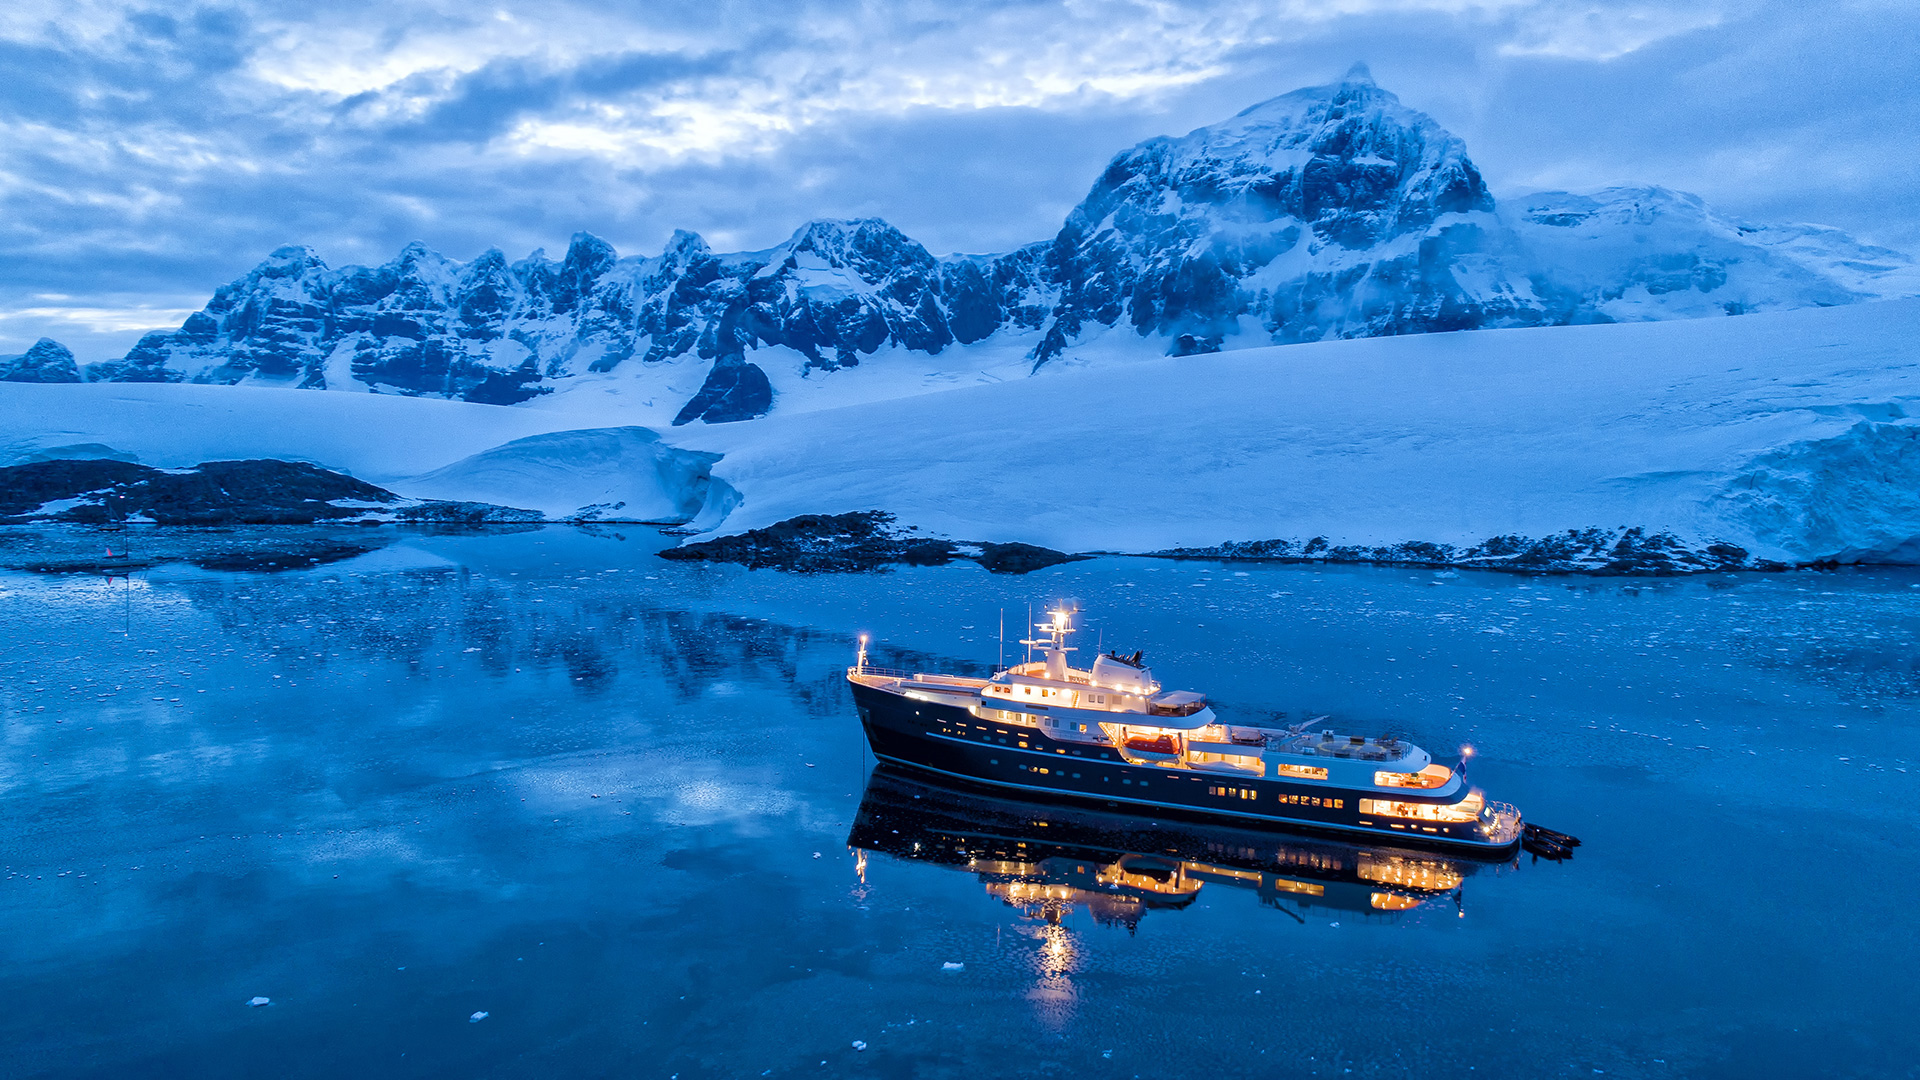 EYOS featured in Superyacht News discussing Polar Code implementation